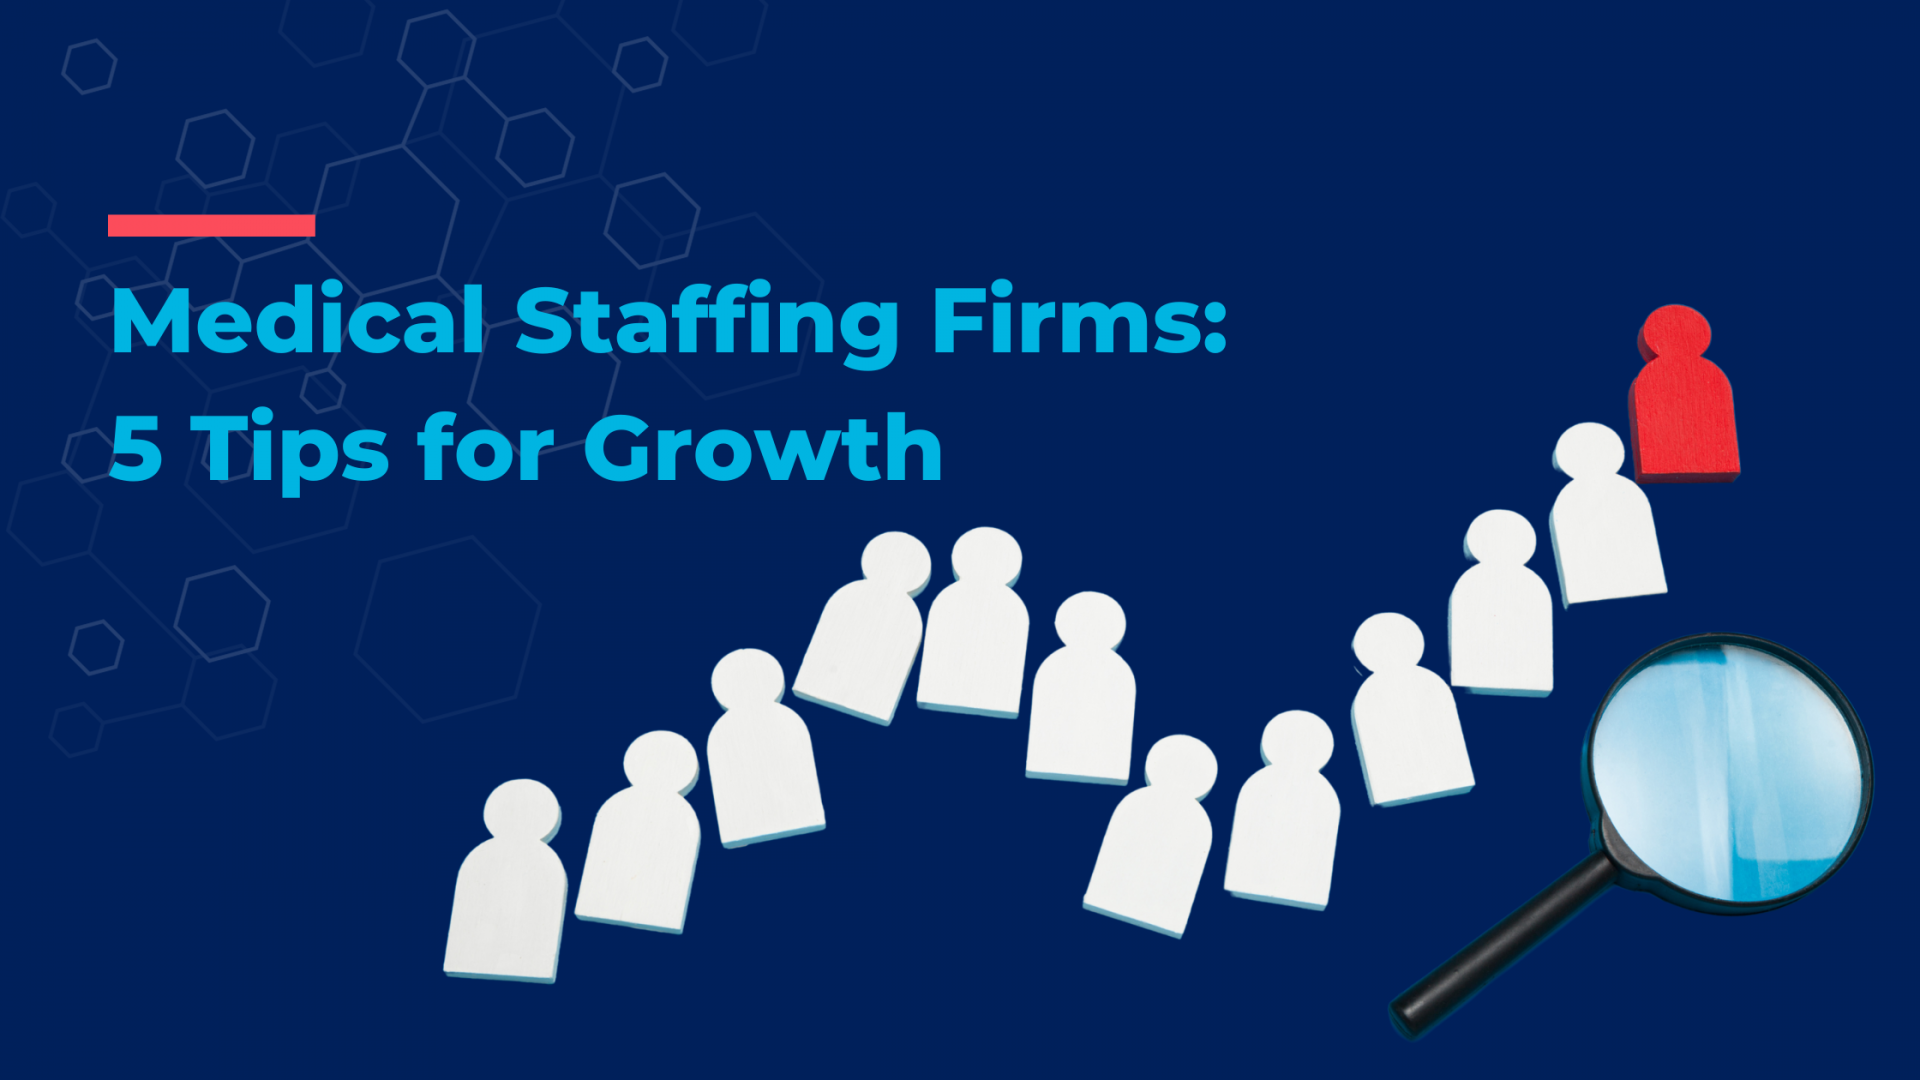 Medical Staffing Firms: 5 Tips for Growth